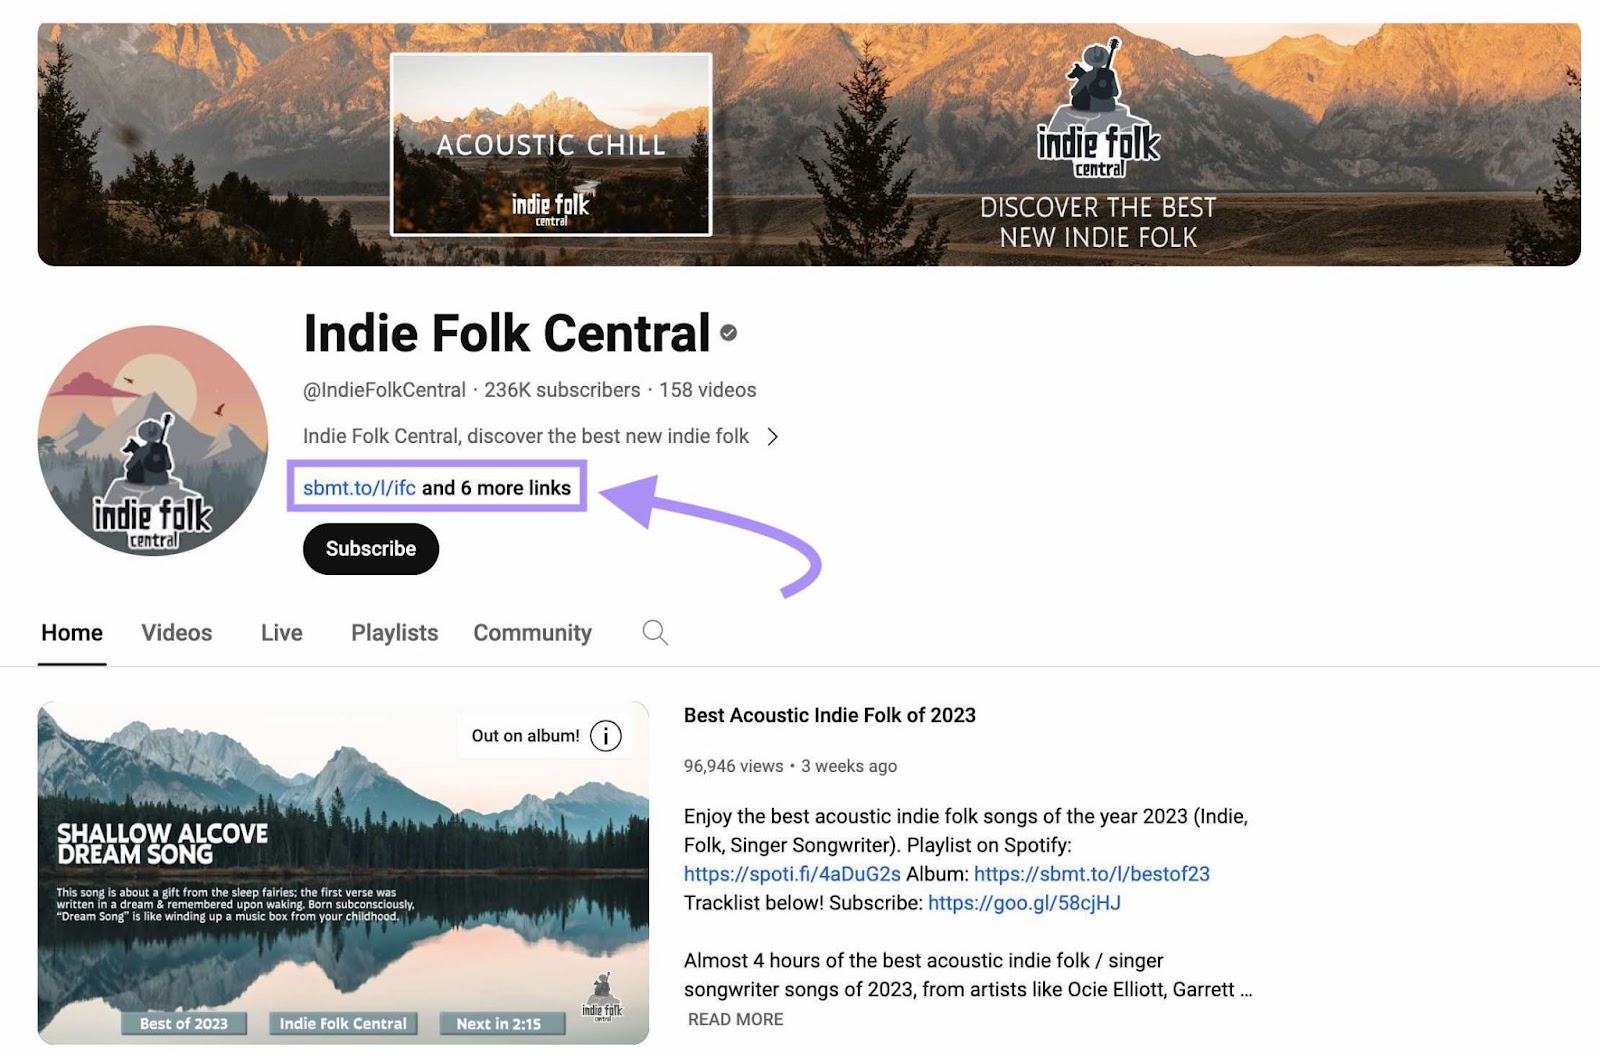 YouTube profile link below the banner of "Indie Folk Central" YouTube channel page